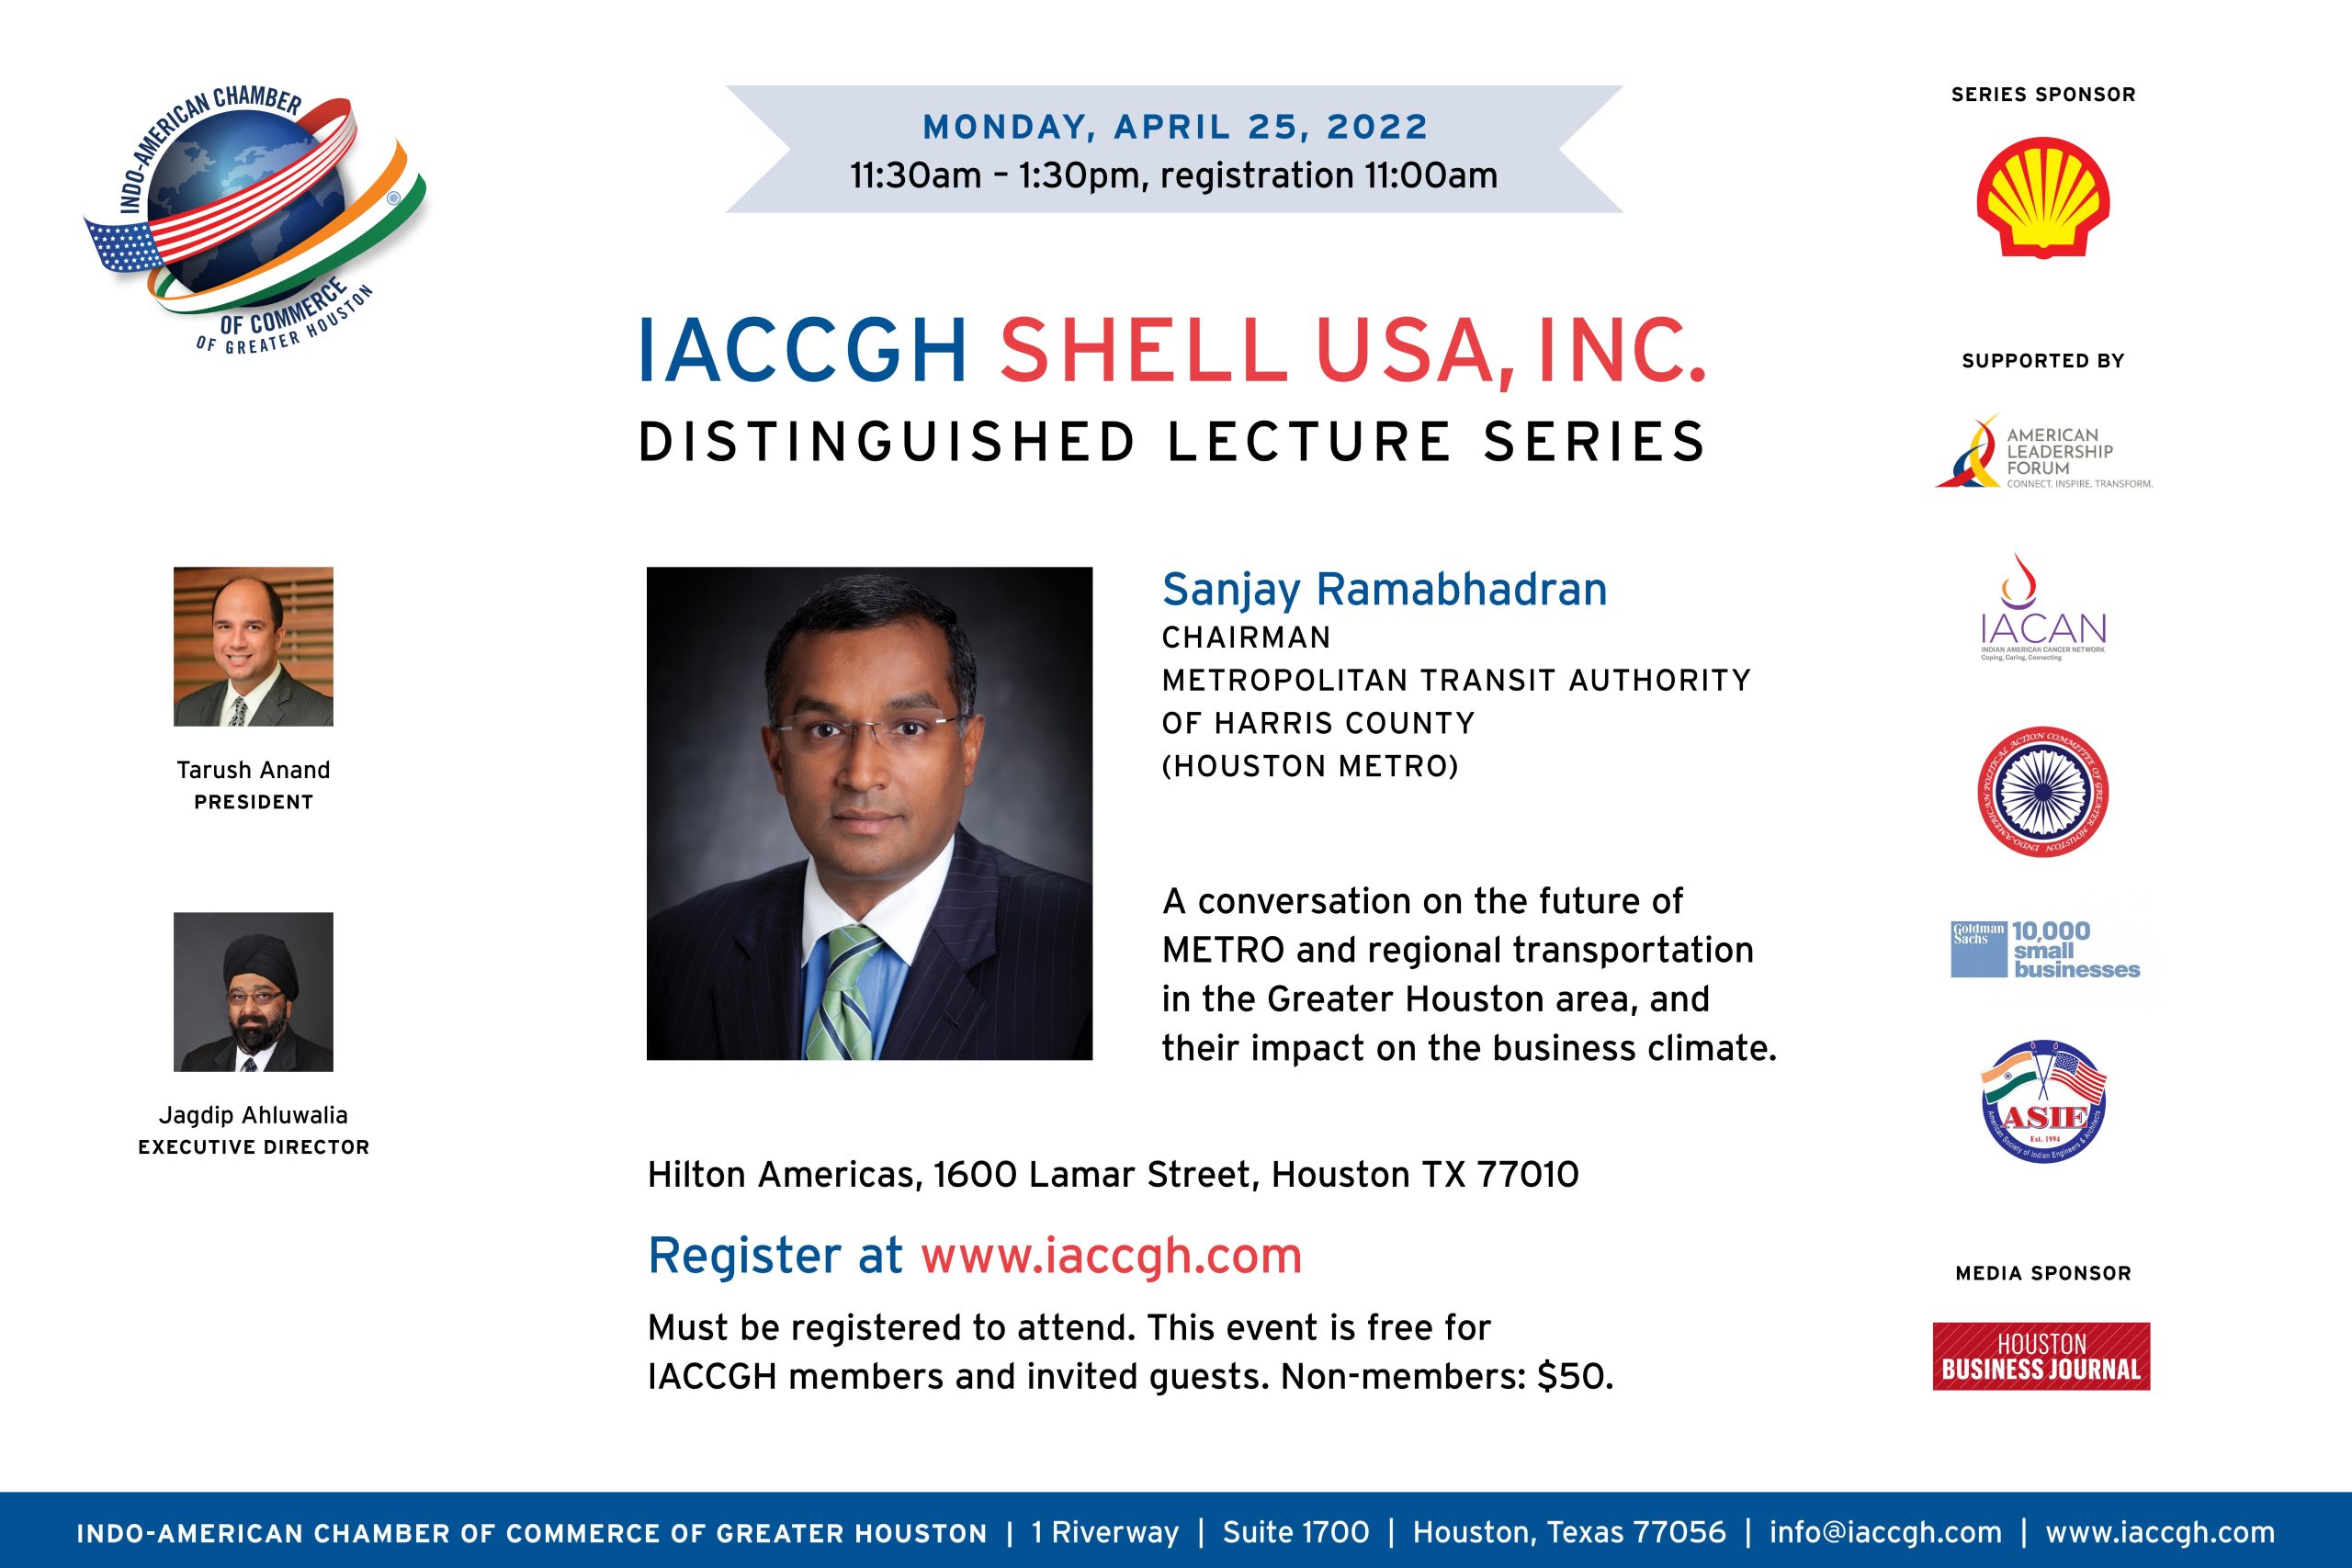 IACCGH Shell USA, Inc. Distinguished Lecture Featuring Sanjay Ramabhadran